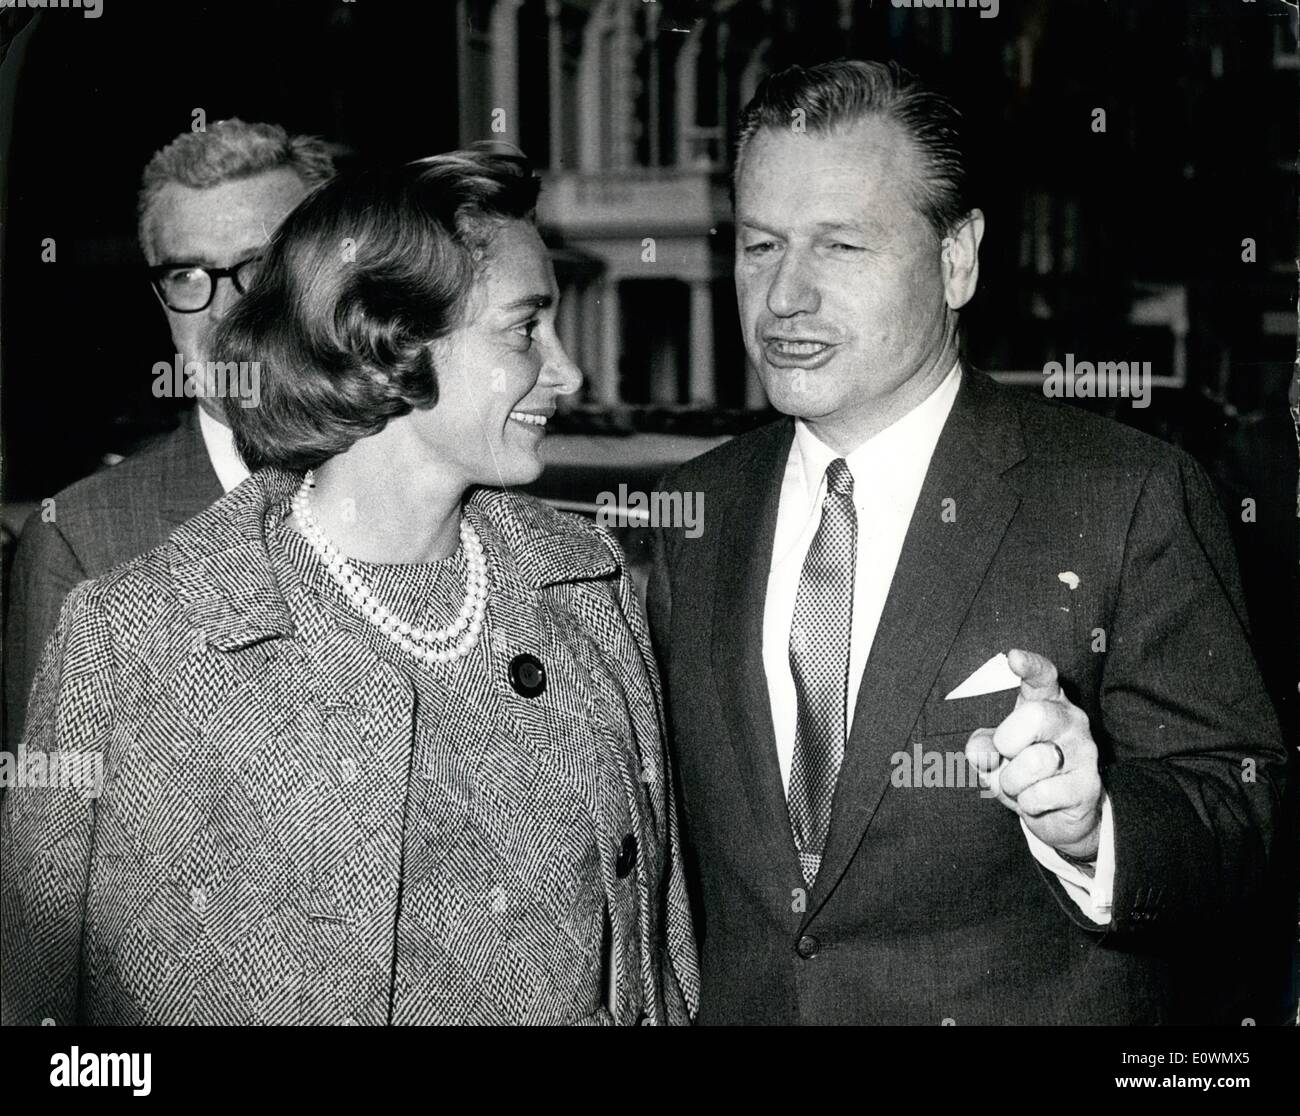 Sep. 09, 1963 - Nelson Rockefeller in London: Nelson Rockefeller, Governor of New York State, and in the running to become the next Republican President of the United State, has come to London on a European tour. He is accompanied by his new wife Margaretta, who he married last May, about a year after his first marriage was dissolved. The 55 year old Governor is meeting Mr. Maudling, Mr. Harold Wilson, Lord Mountbatten and Mr. Macmillan while in this country, then he goes on to Germany, West Berlin, Brussels and Paris. Photo shows Nelson Rockefeller and his wife happy. Stock Photo